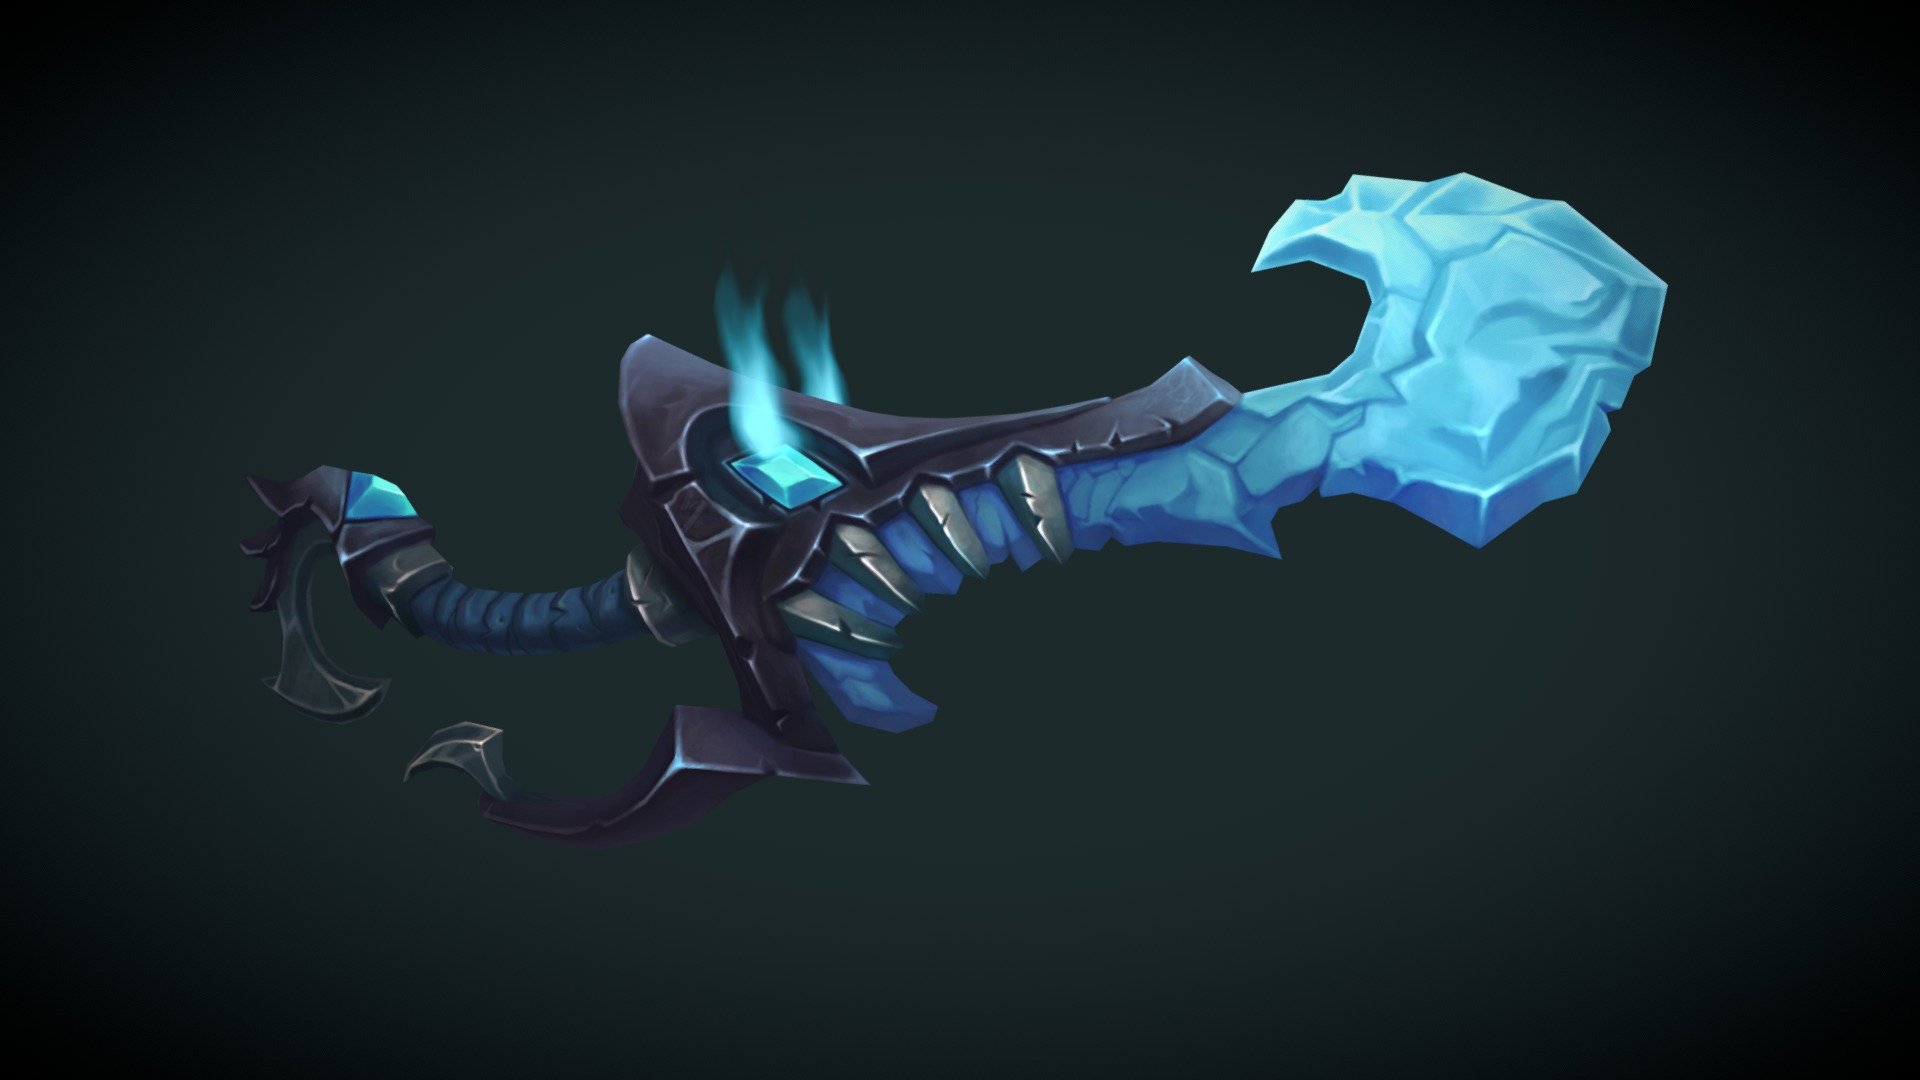 This is my fan art of one of my favorite daggers from World of Warcraft 3d model